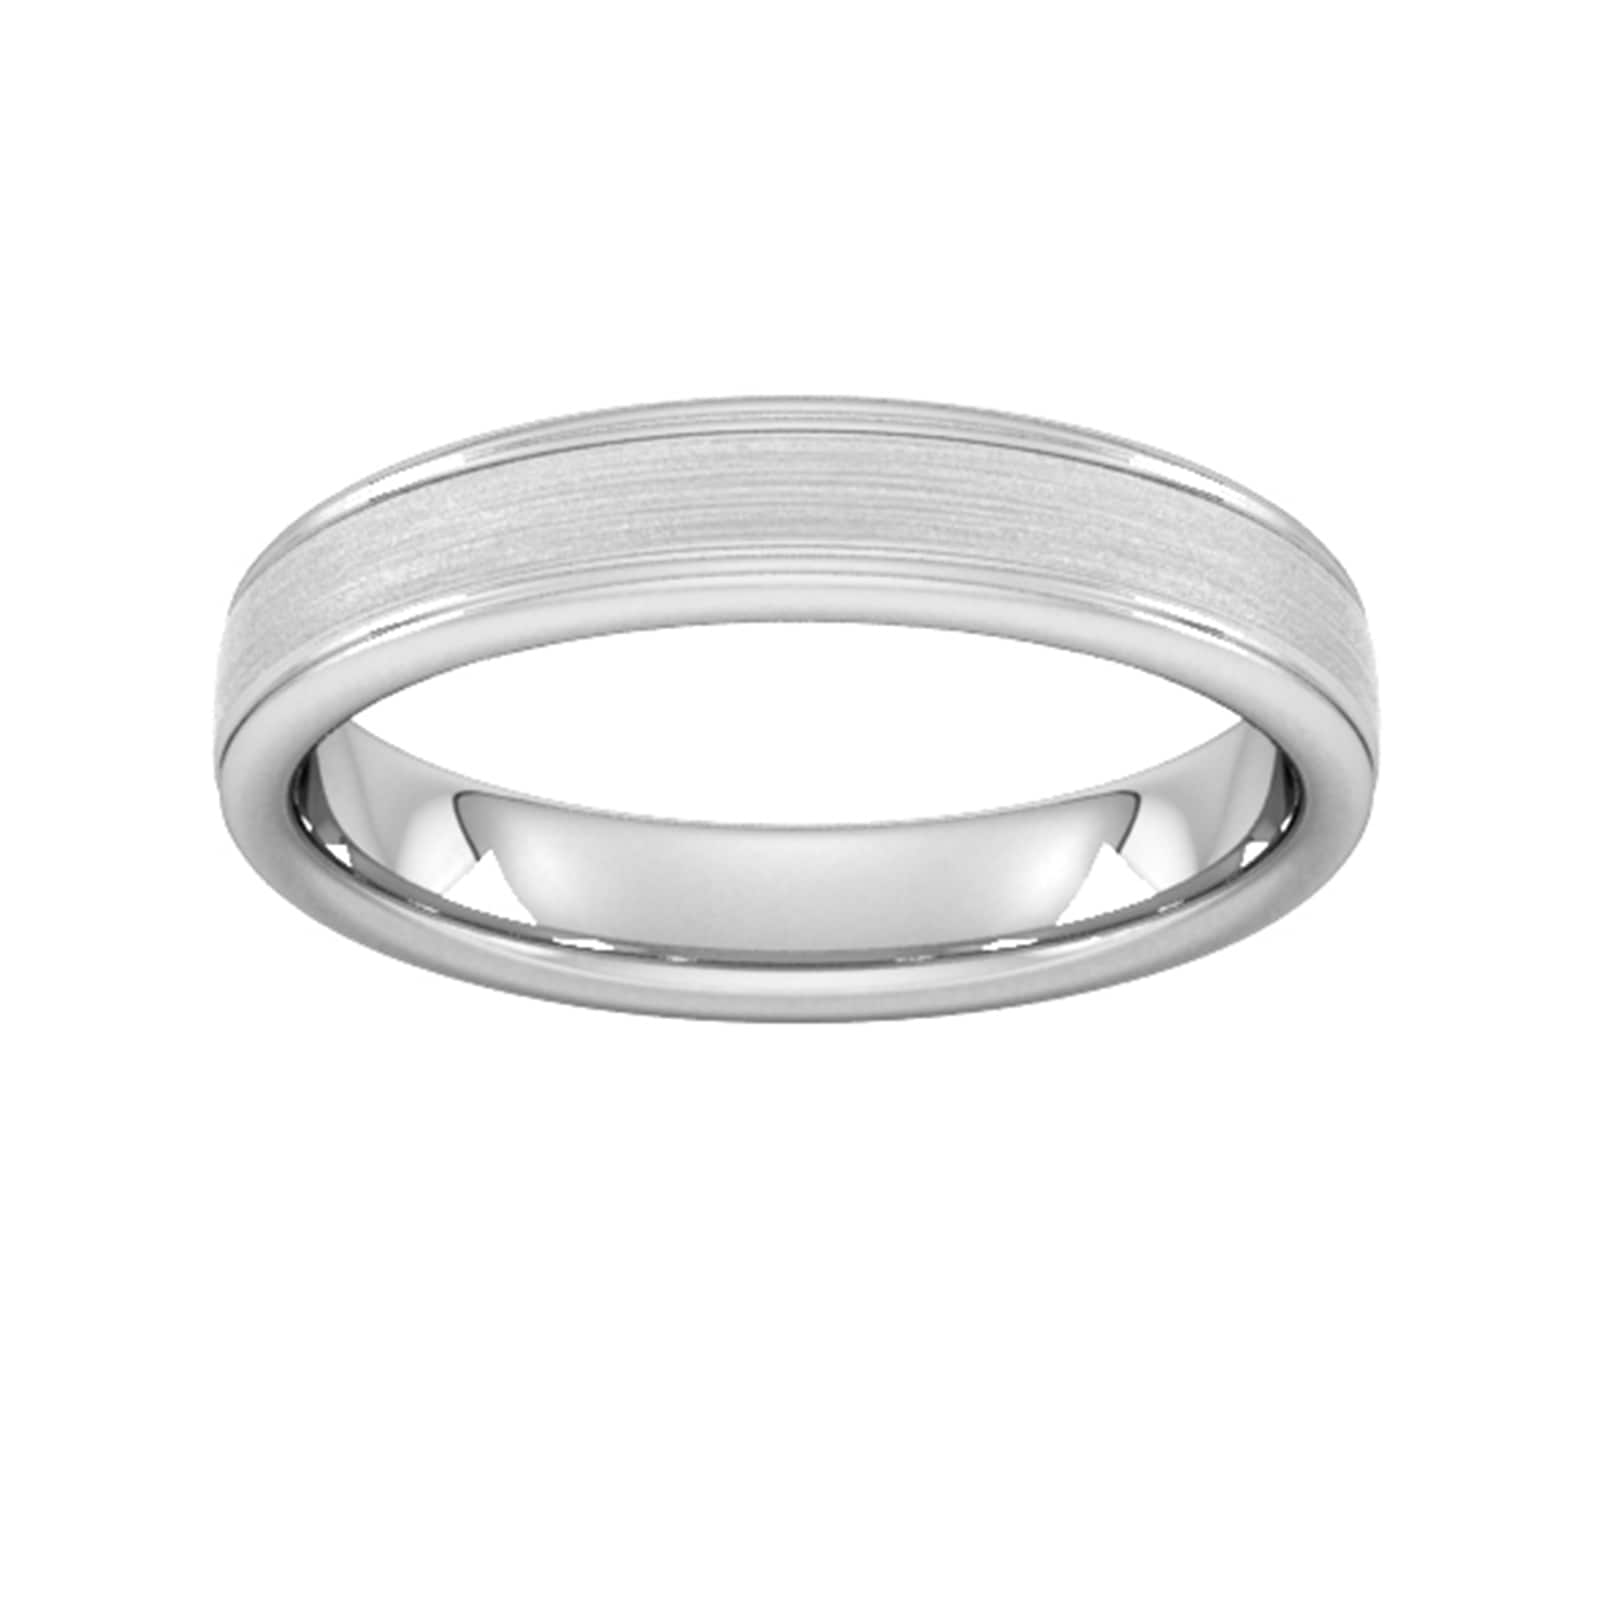 4mm D Shape Standard Matt Centre With Grooves Wedding Ring In 9 Carat White Gold - Ring Size U